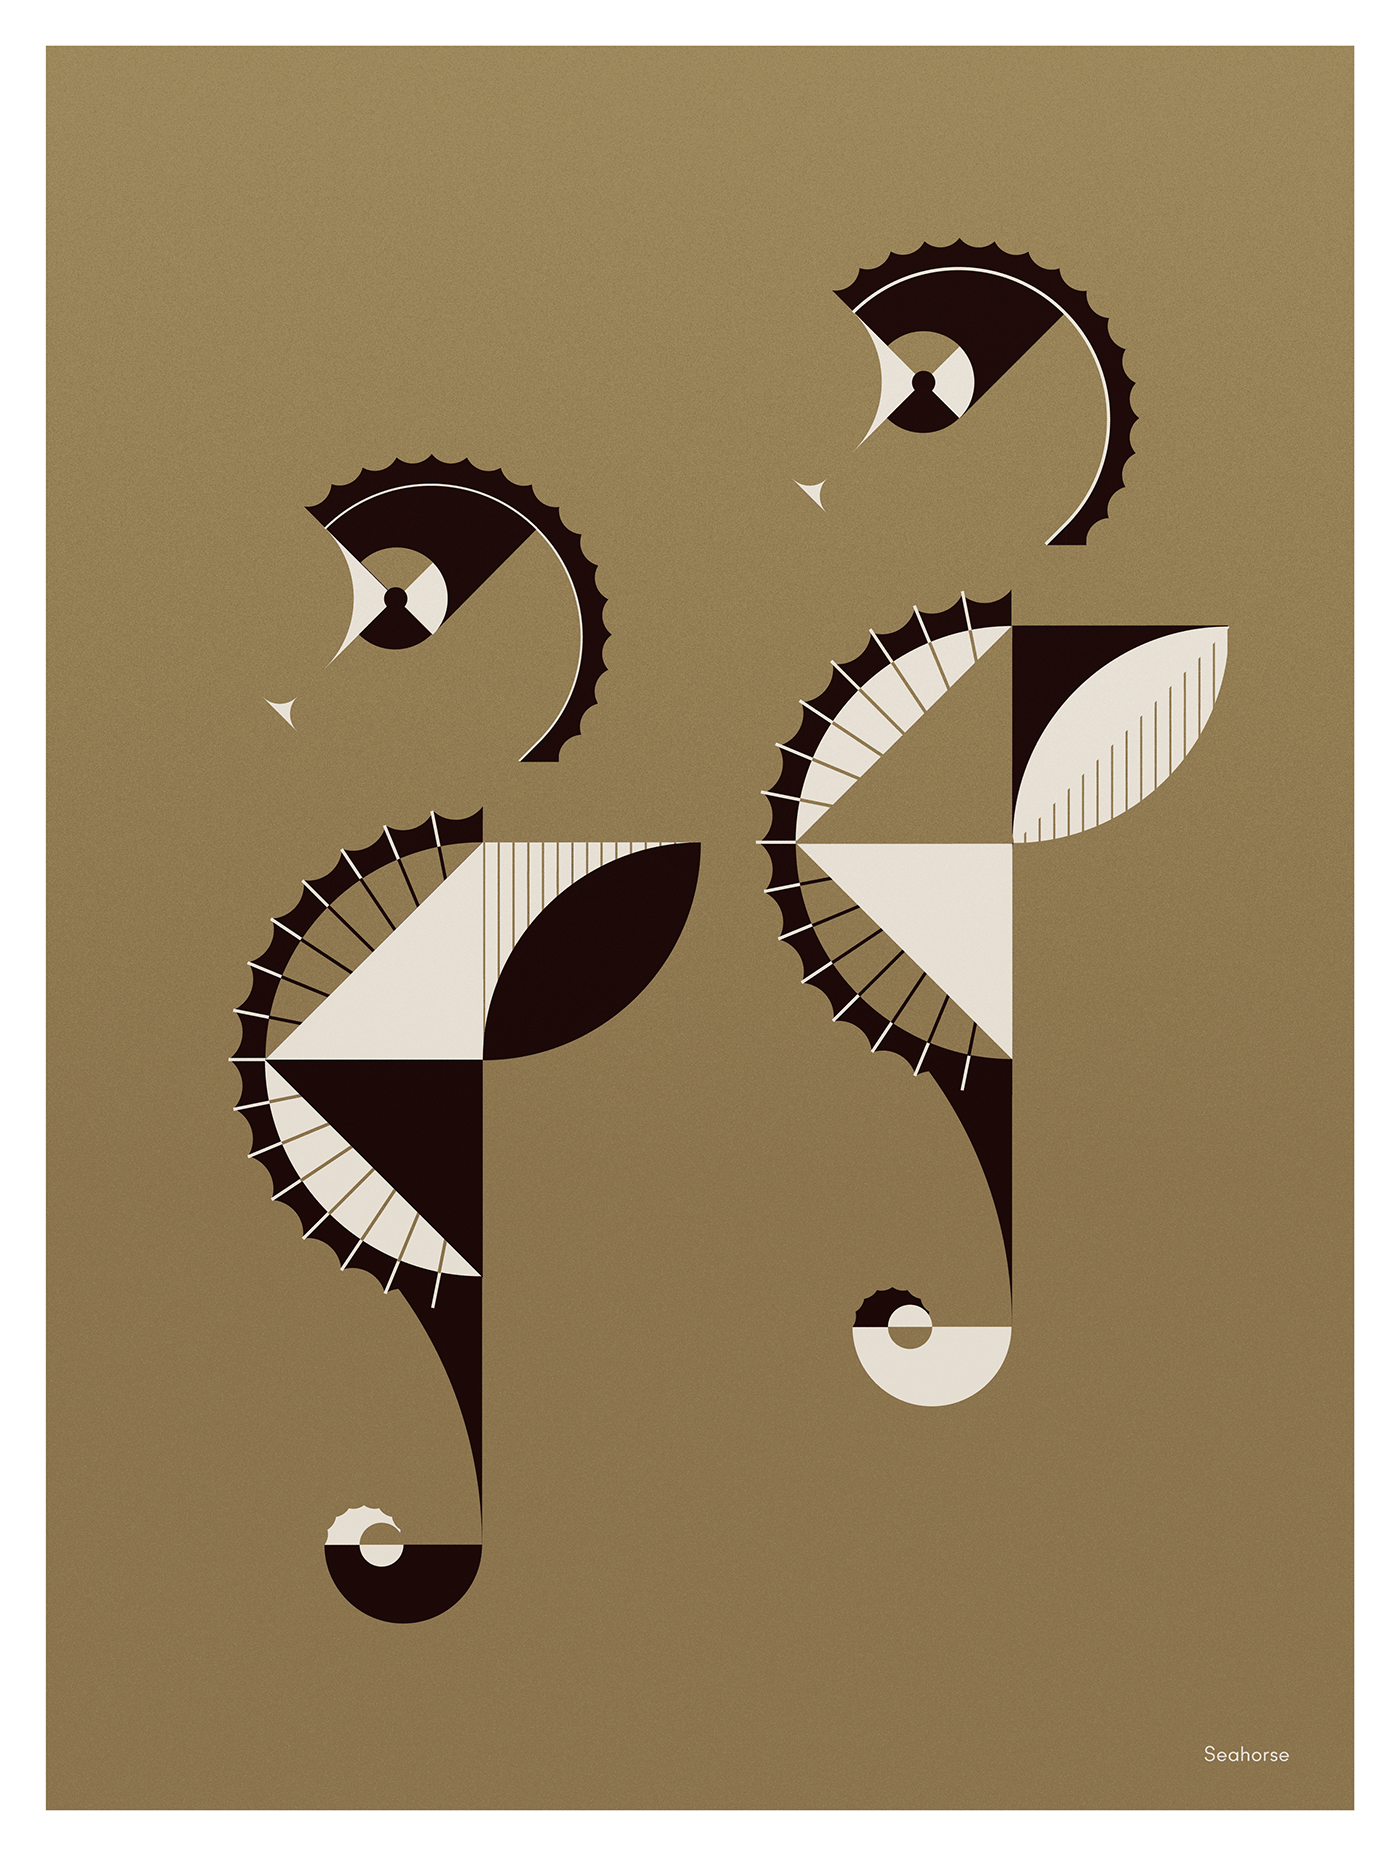 Golden animals, poster series from Studio Soleil, that created for a various of projects. Seahorses.